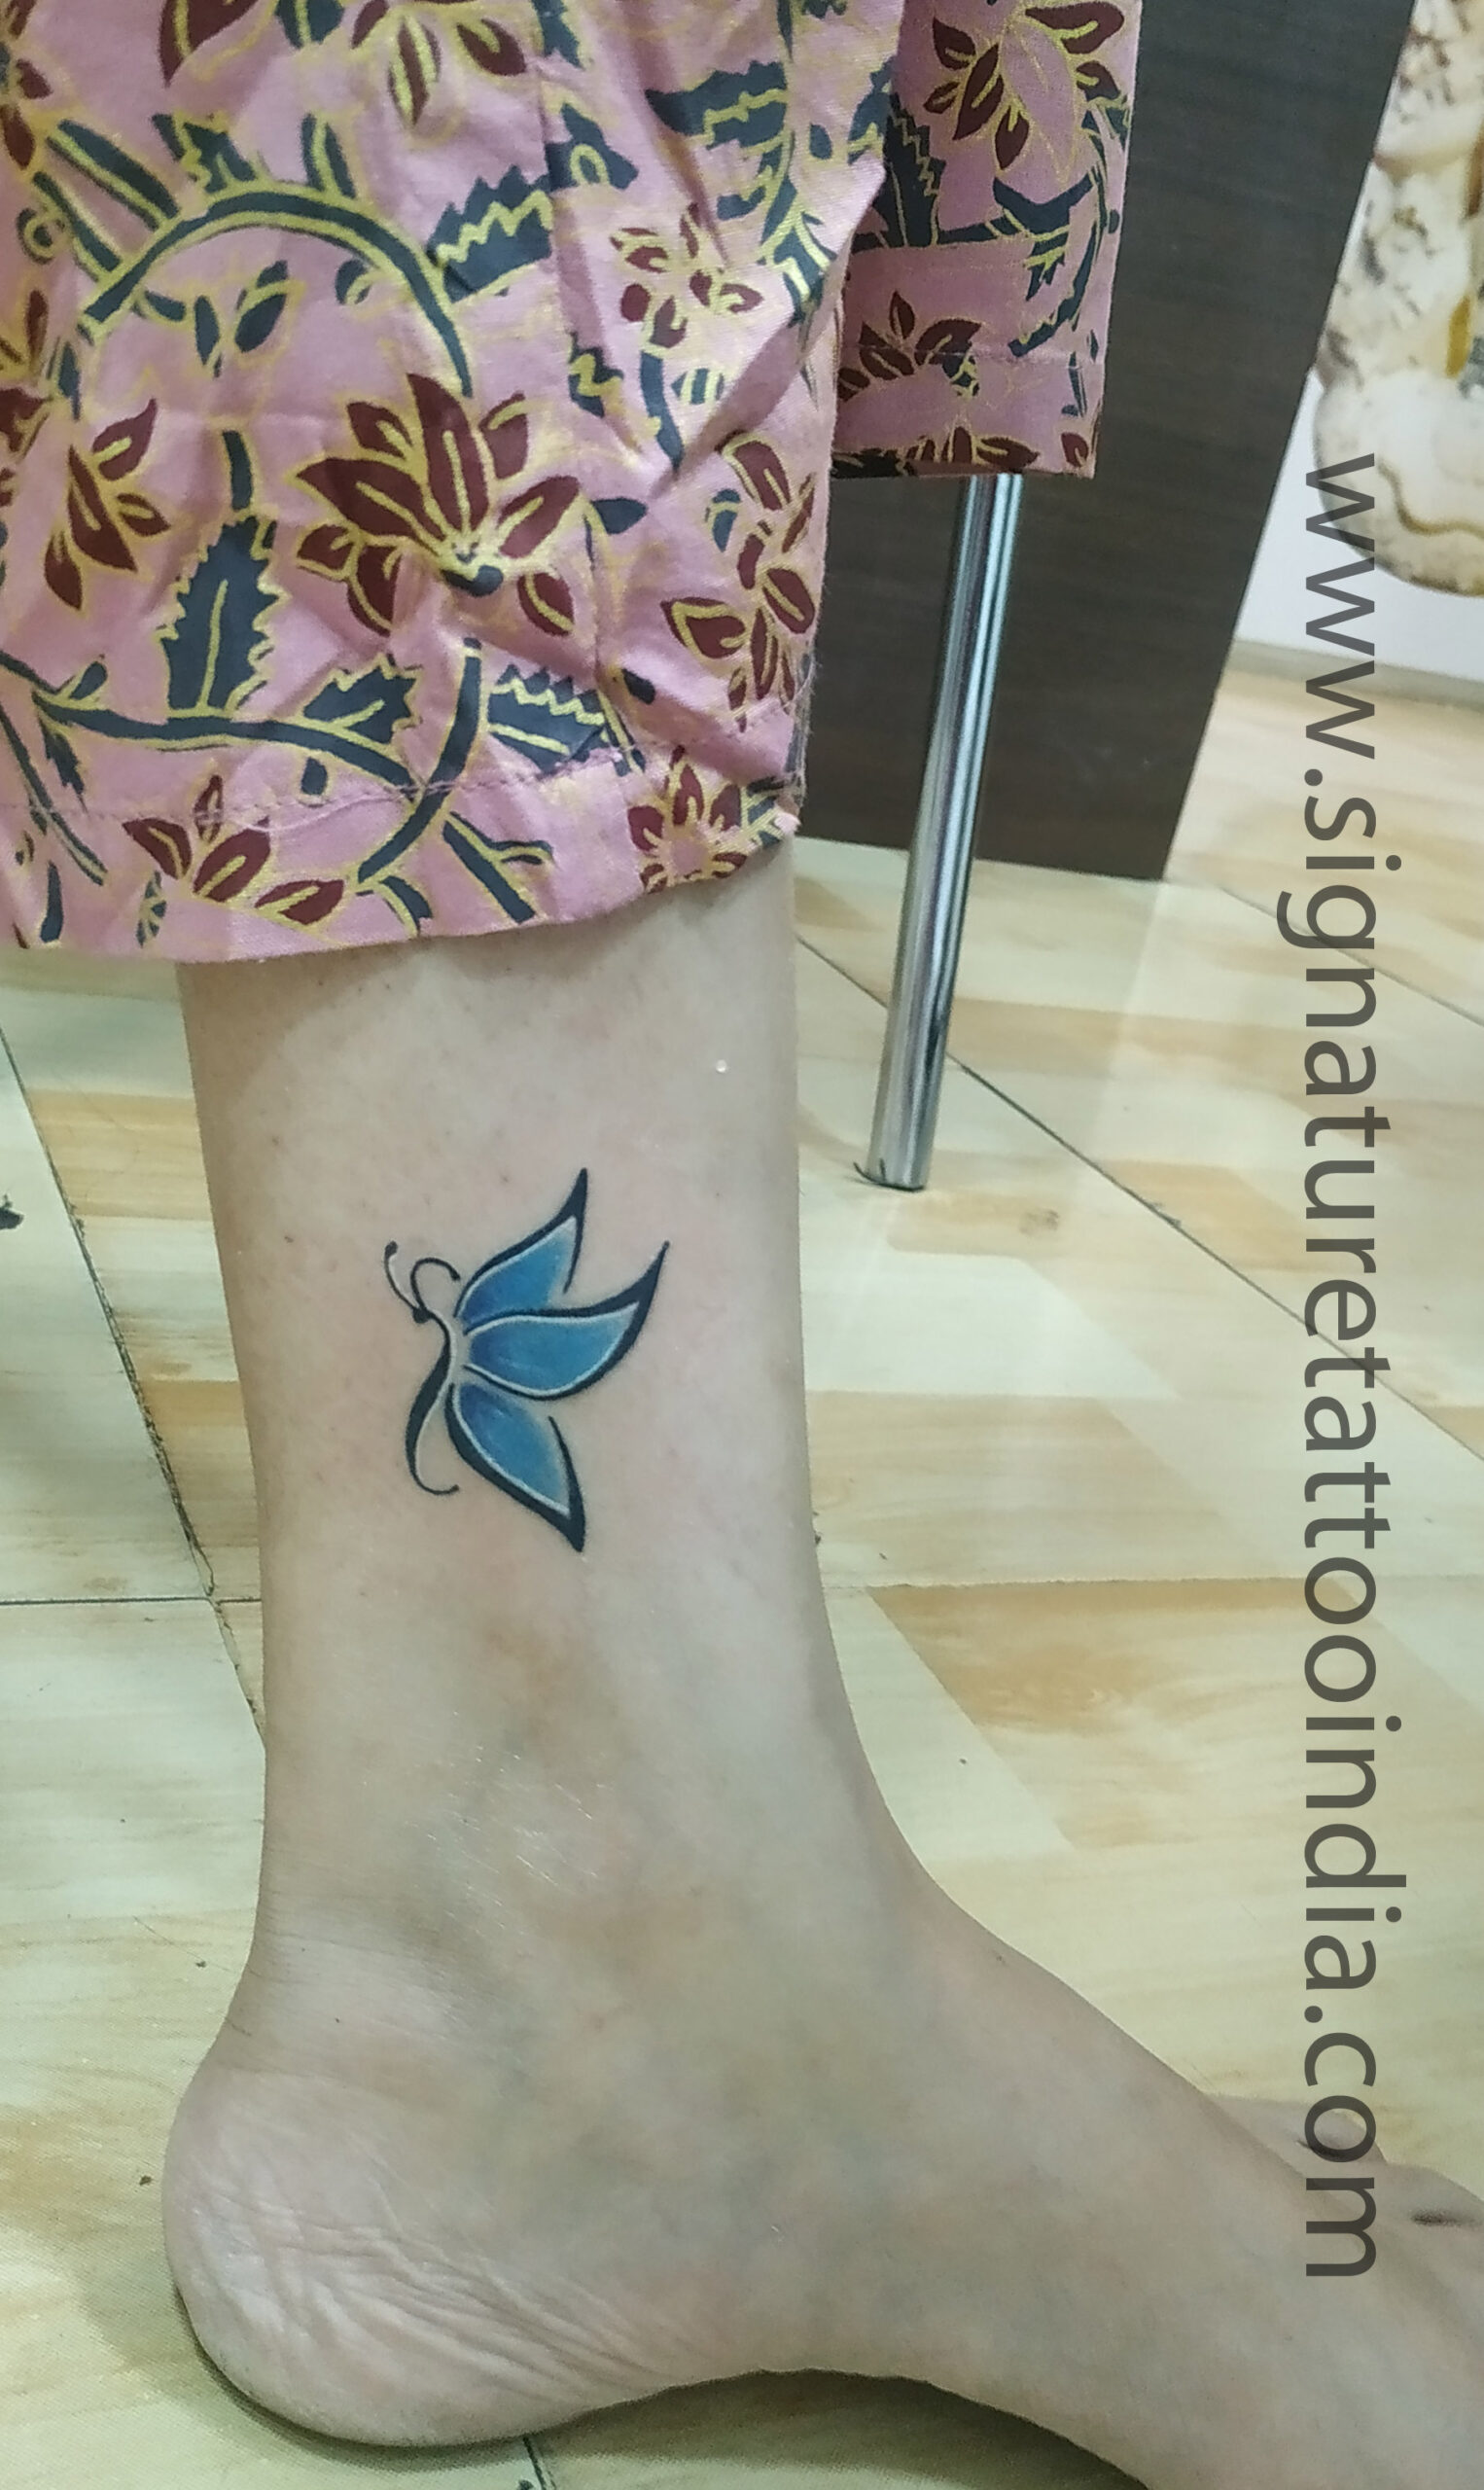 Ordershock Maa With Trishul Tattoo Stickers For Male And Female Tattoo -  Price in India, Buy Ordershock Maa With Trishul Tattoo Stickers For Male  And Female Tattoo Online In India, Reviews, Ratings